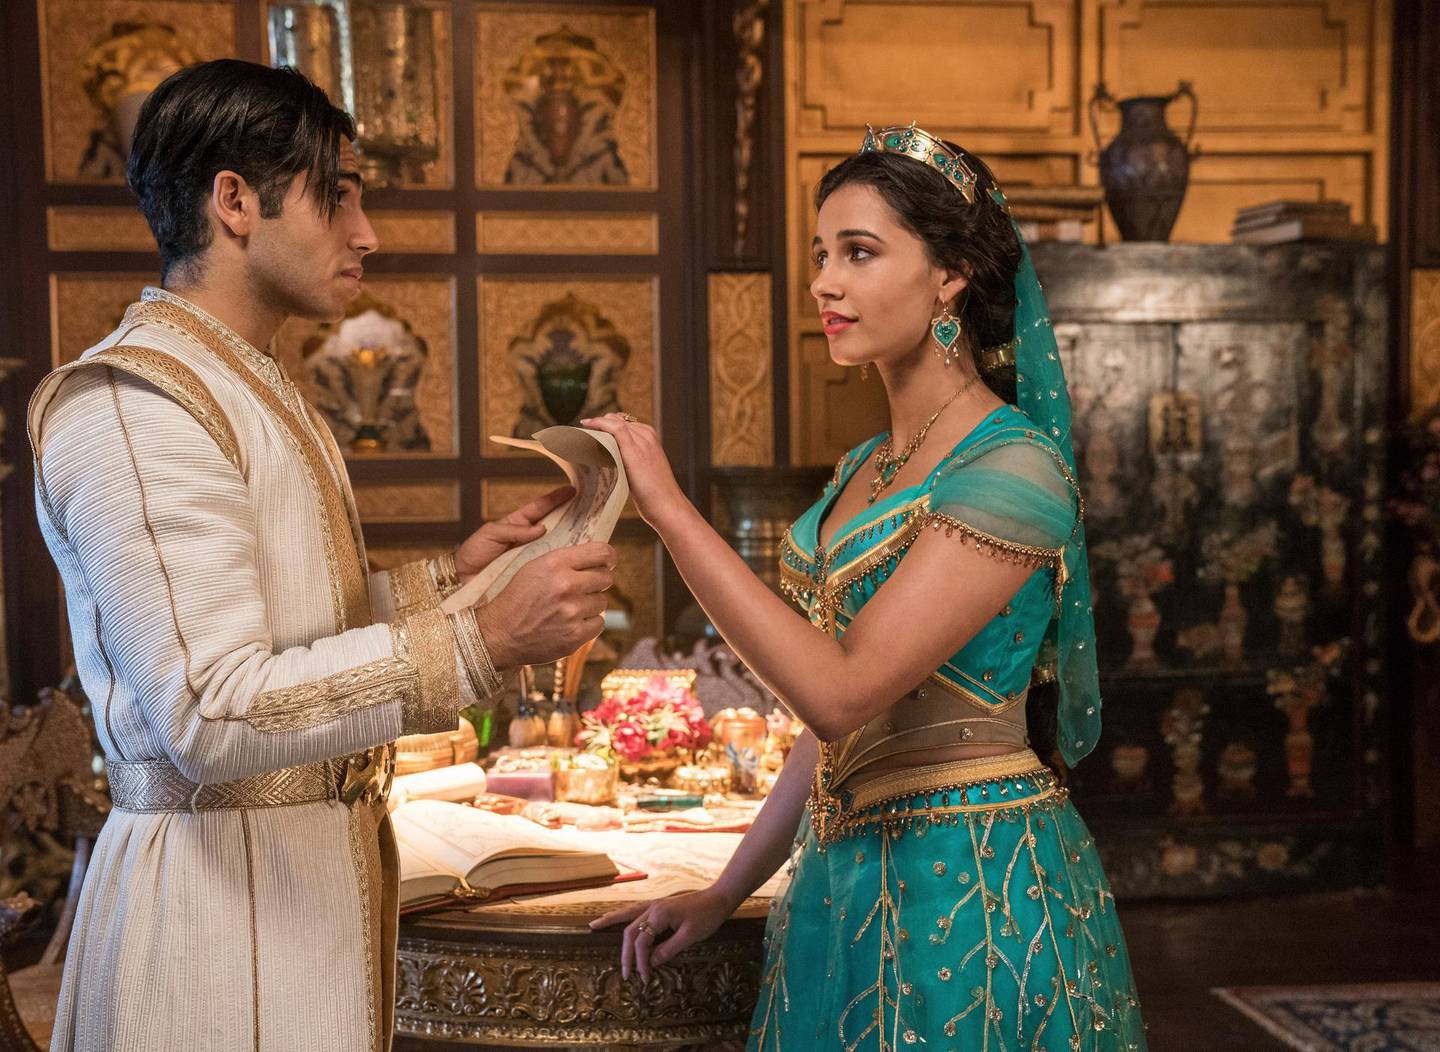 This image released by Disney shows Mena Massoud as Aladdin, left, and Naomi Scott as Jasmine in Disney's live-action adaptation of the 1992 animated classic "Aladdin." (Daniel Smith/Disney via AP)